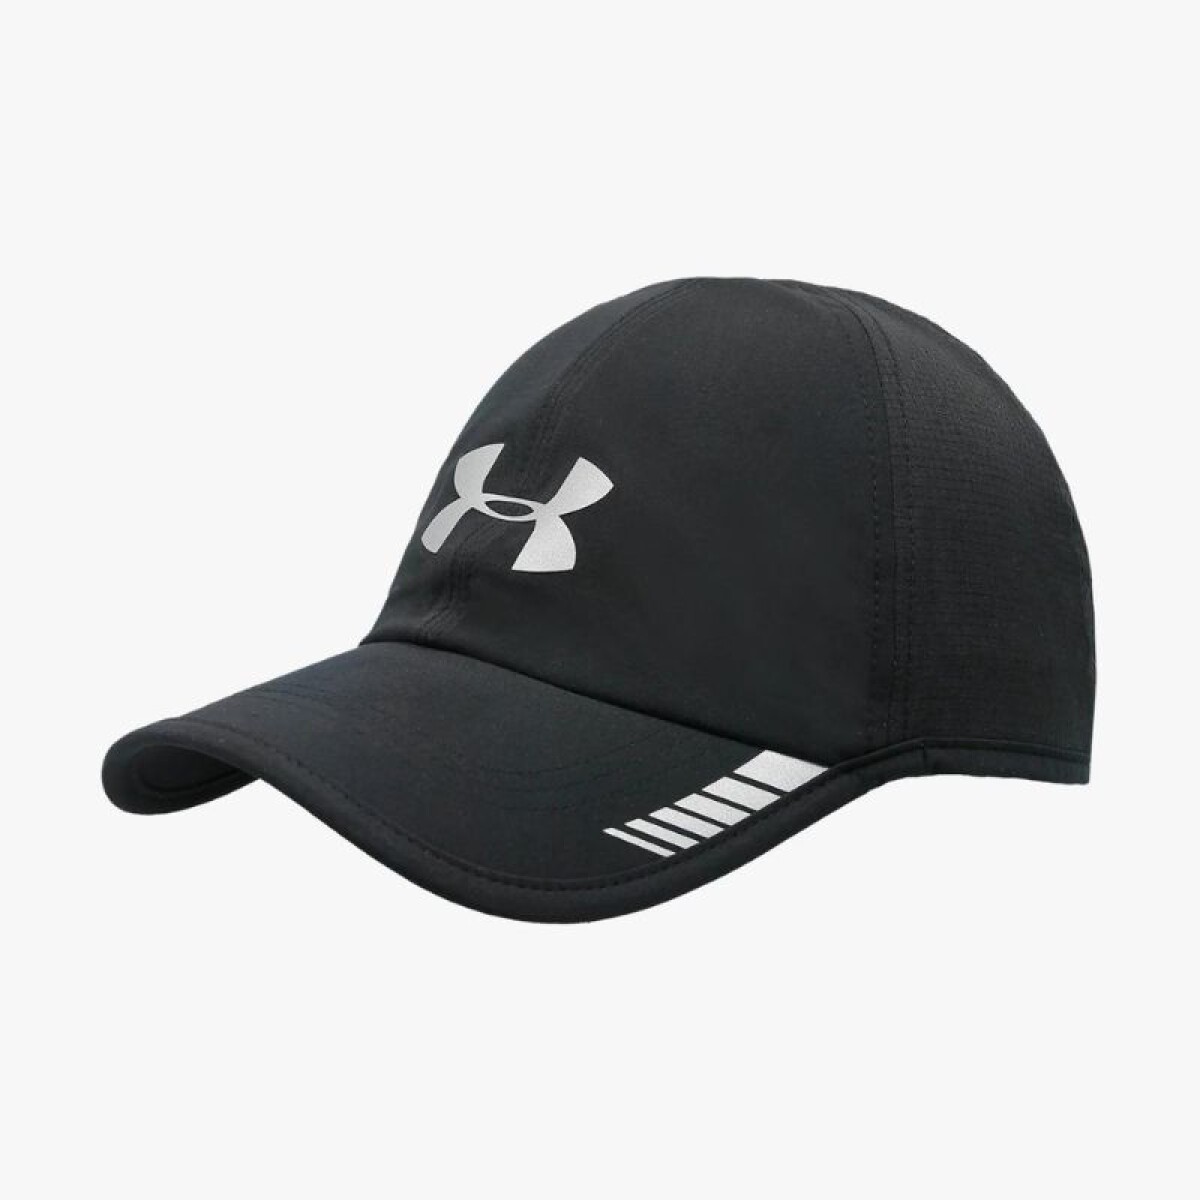 Gorro Under Armour Running Launch O/S - Color Único 